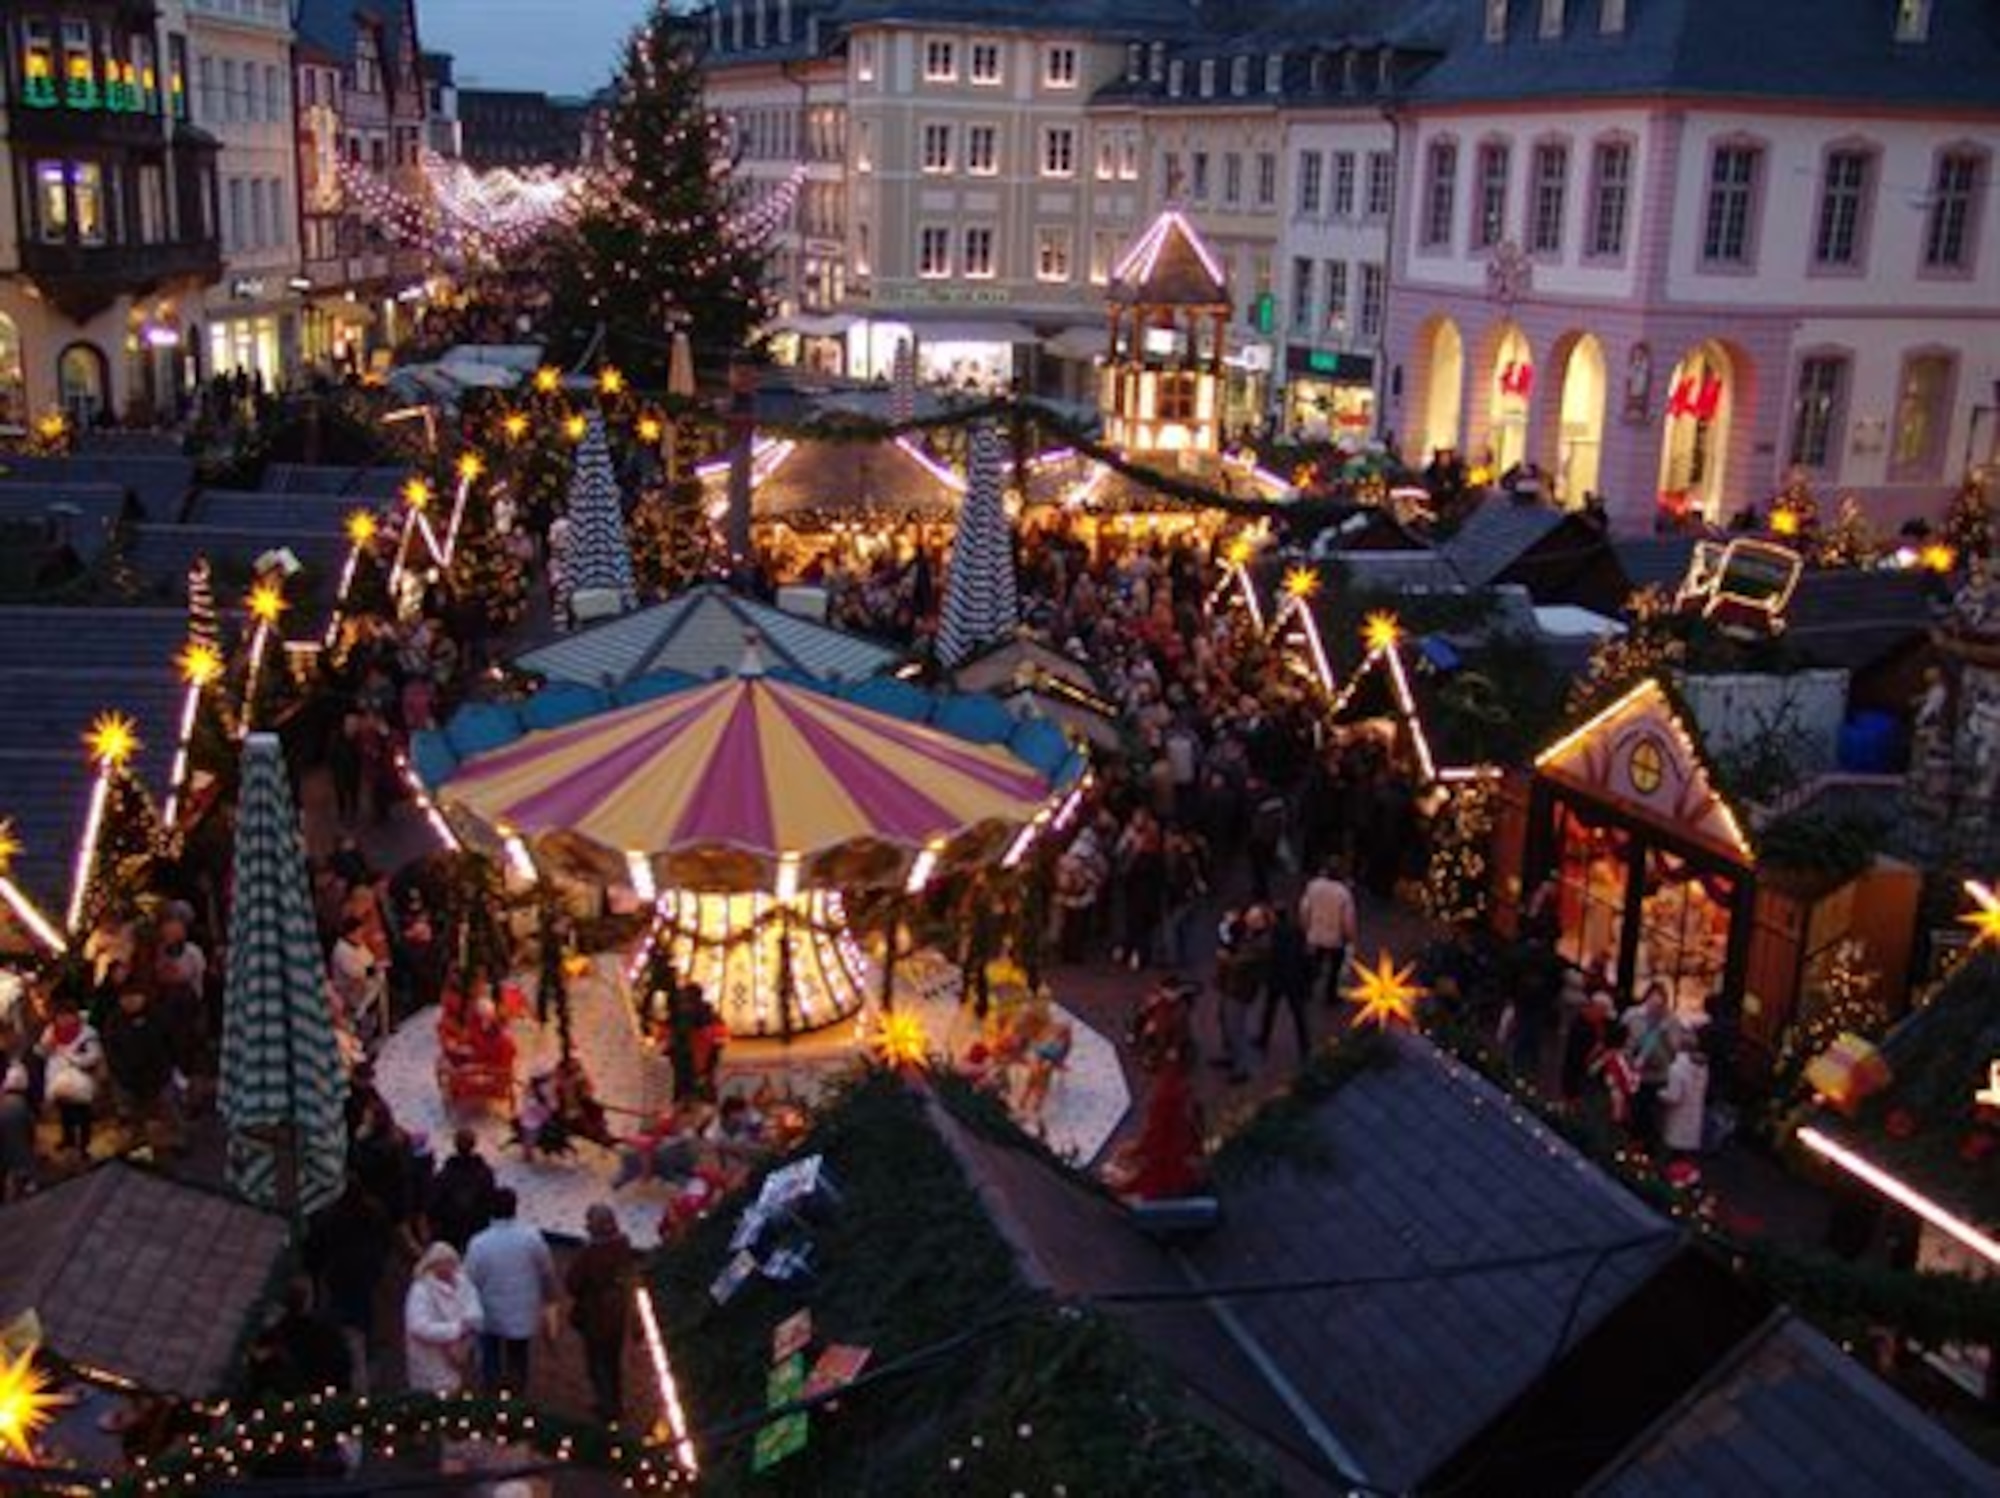 Trier is presently in full swing setting up their Christmas market as seen in this November 2011 photo. This month, many German cities begin setting up their traditional Weihnachtsmaerkte, or Christmas markets. (U.S. Air Force photo/Iris Reiff)